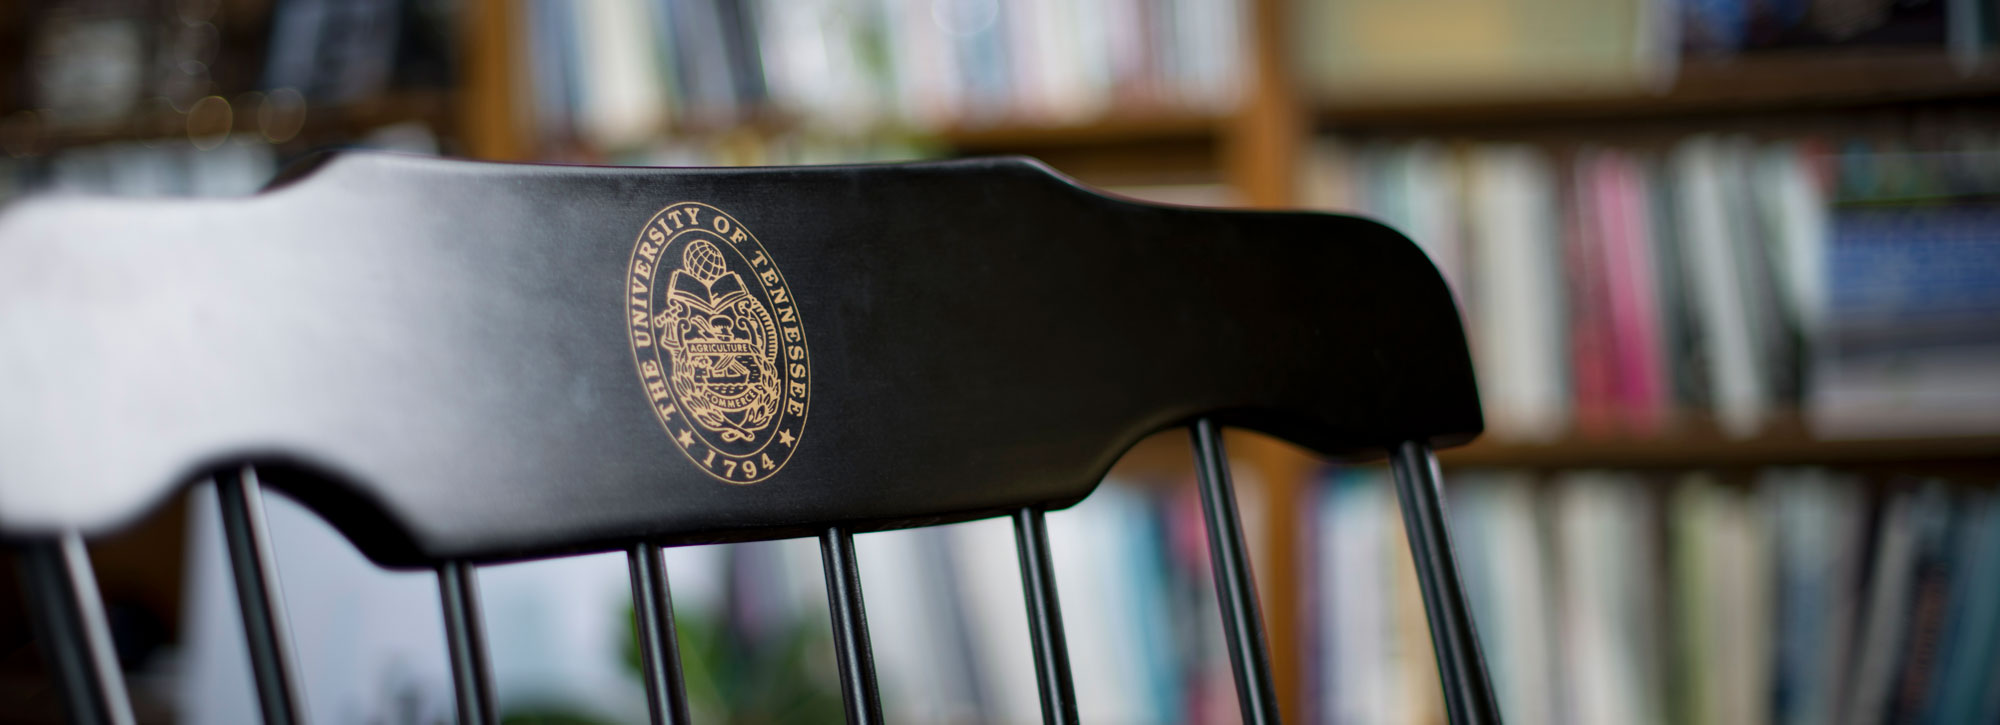 black mahogany chair in the president's office with gold university seal